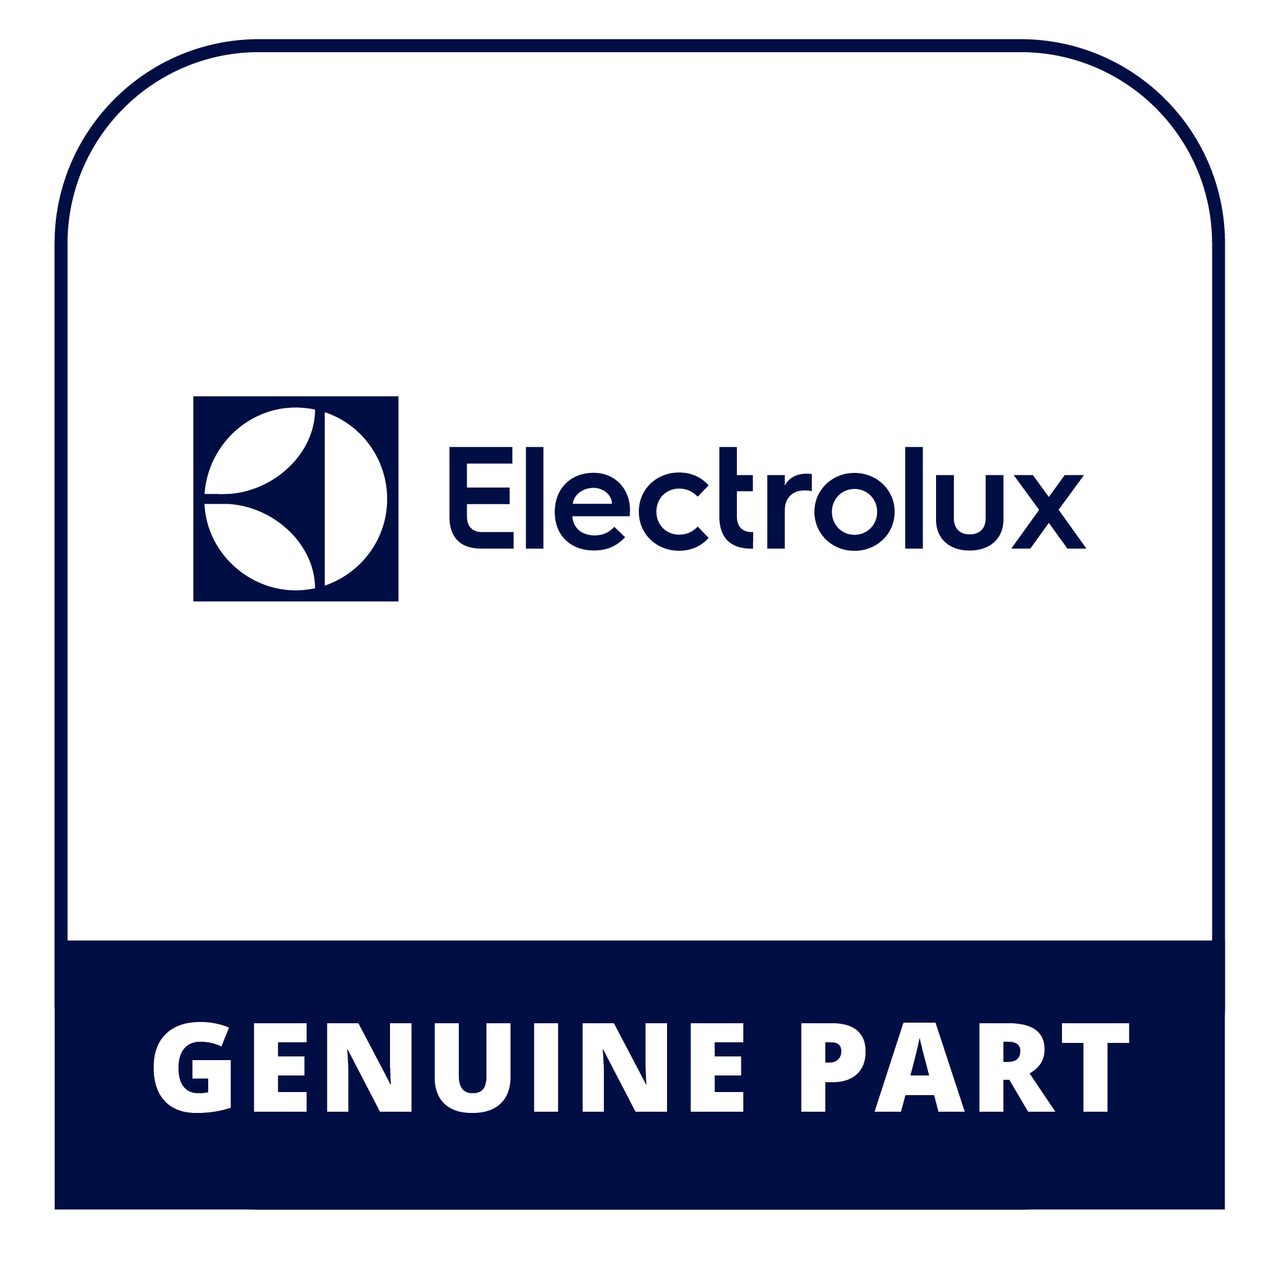 Frigidaire - Electrolux 318203968 Owners Manual - Genuine Electrolux Part